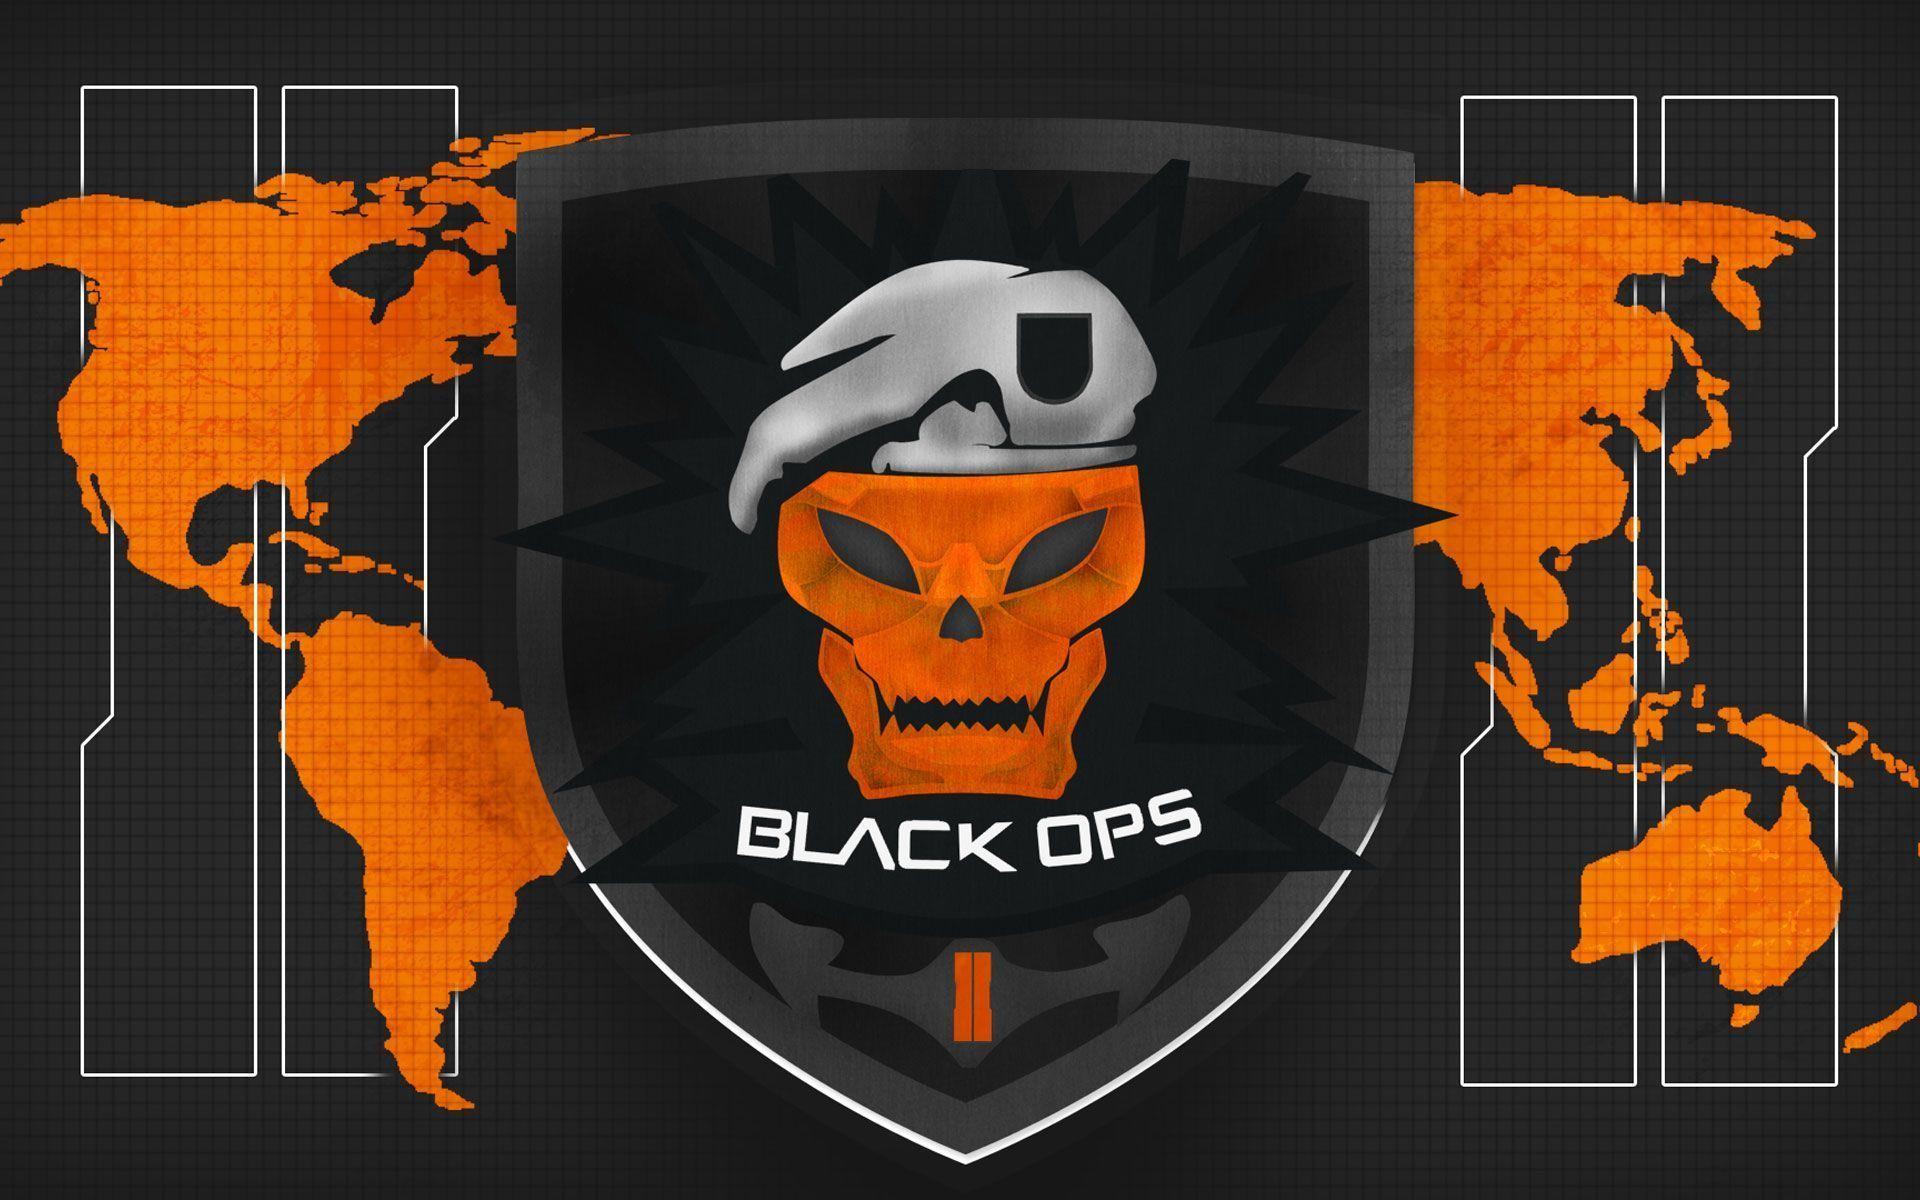 Black Ops 2 HD Wallpaper Collection. Call Of Duty Map Packs